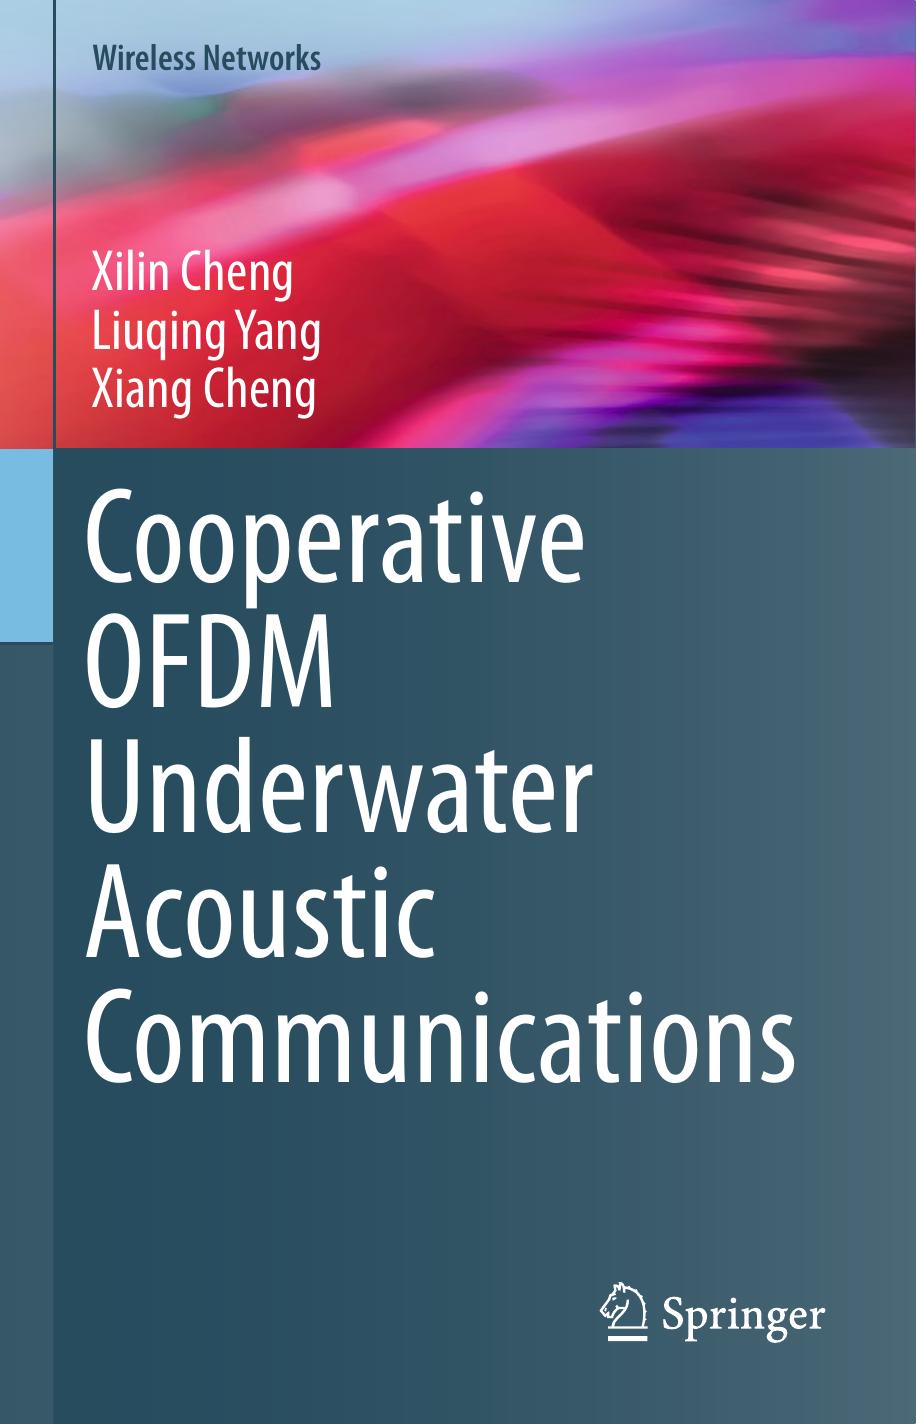 Cooperative Ofdm Underwater Acoustic Communications